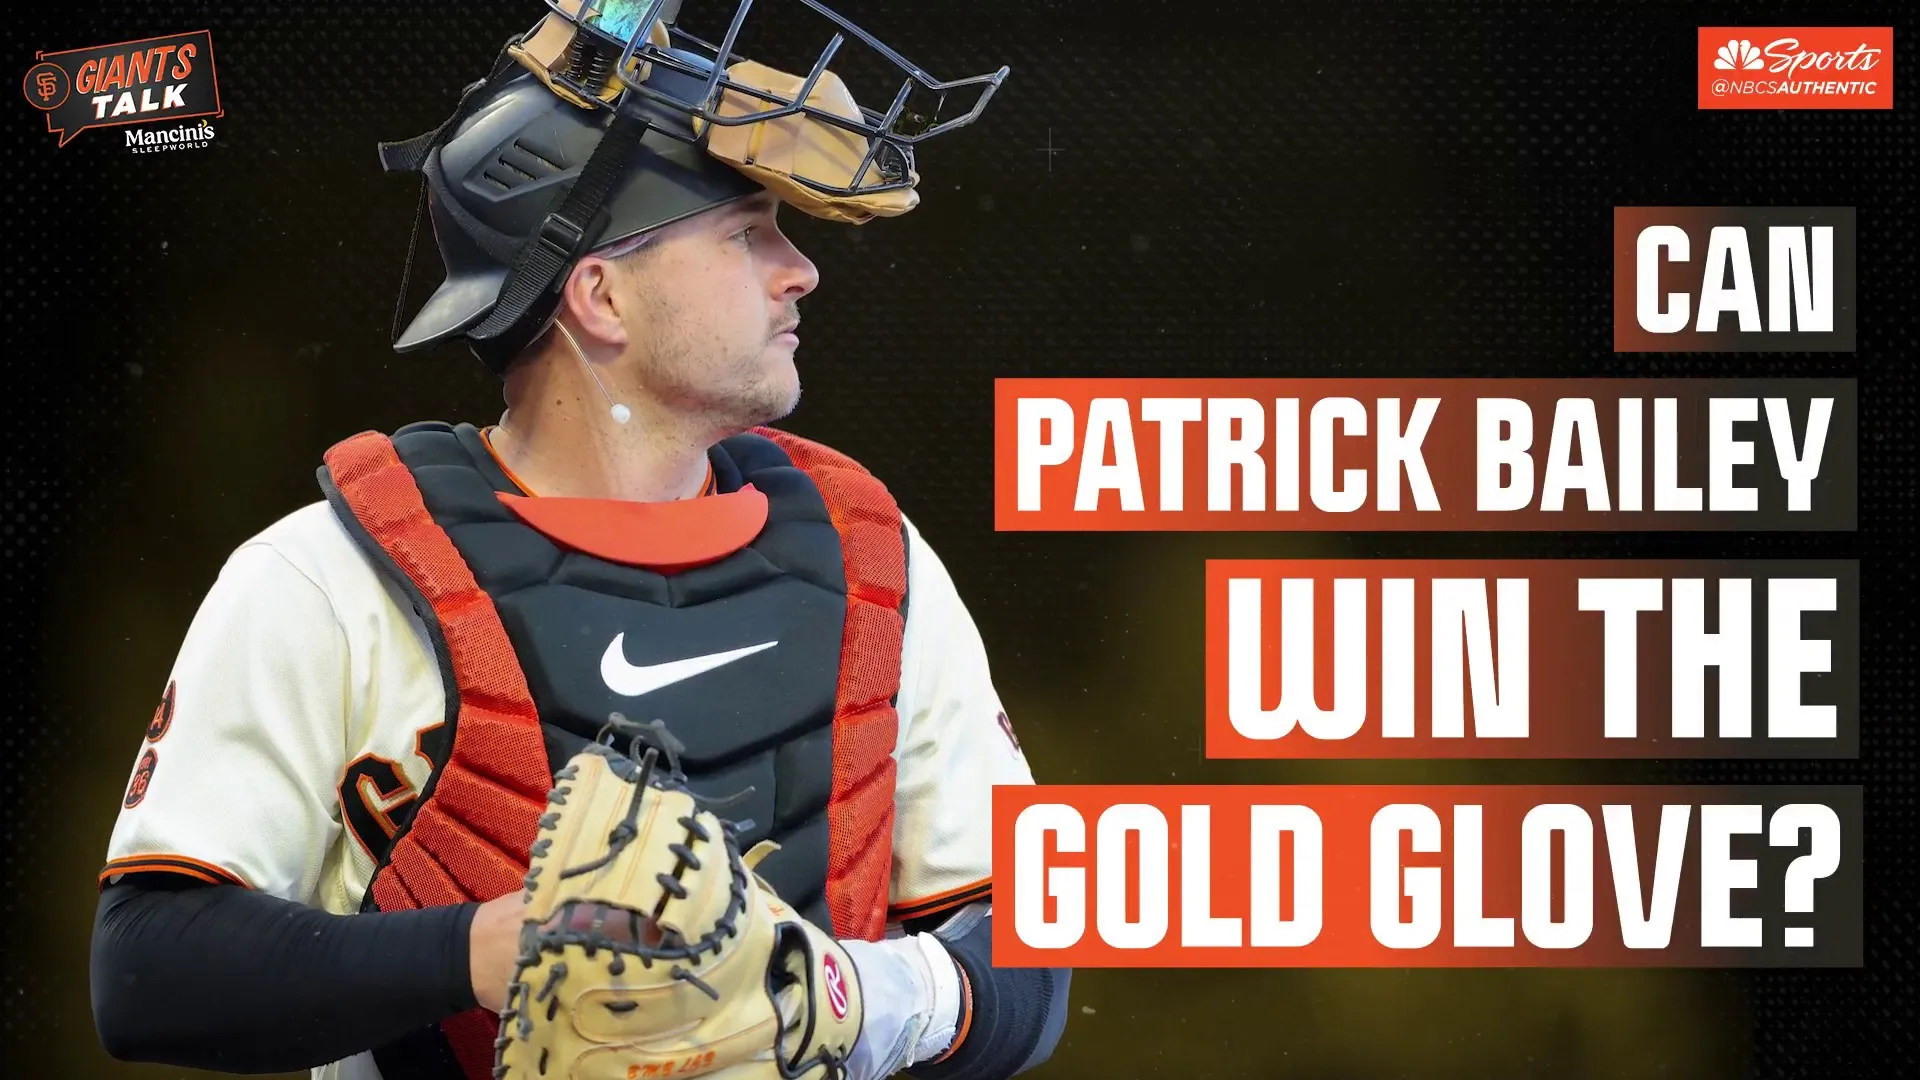 Can Patrick Bailey win the Gold Glove with the Giants? – NBC